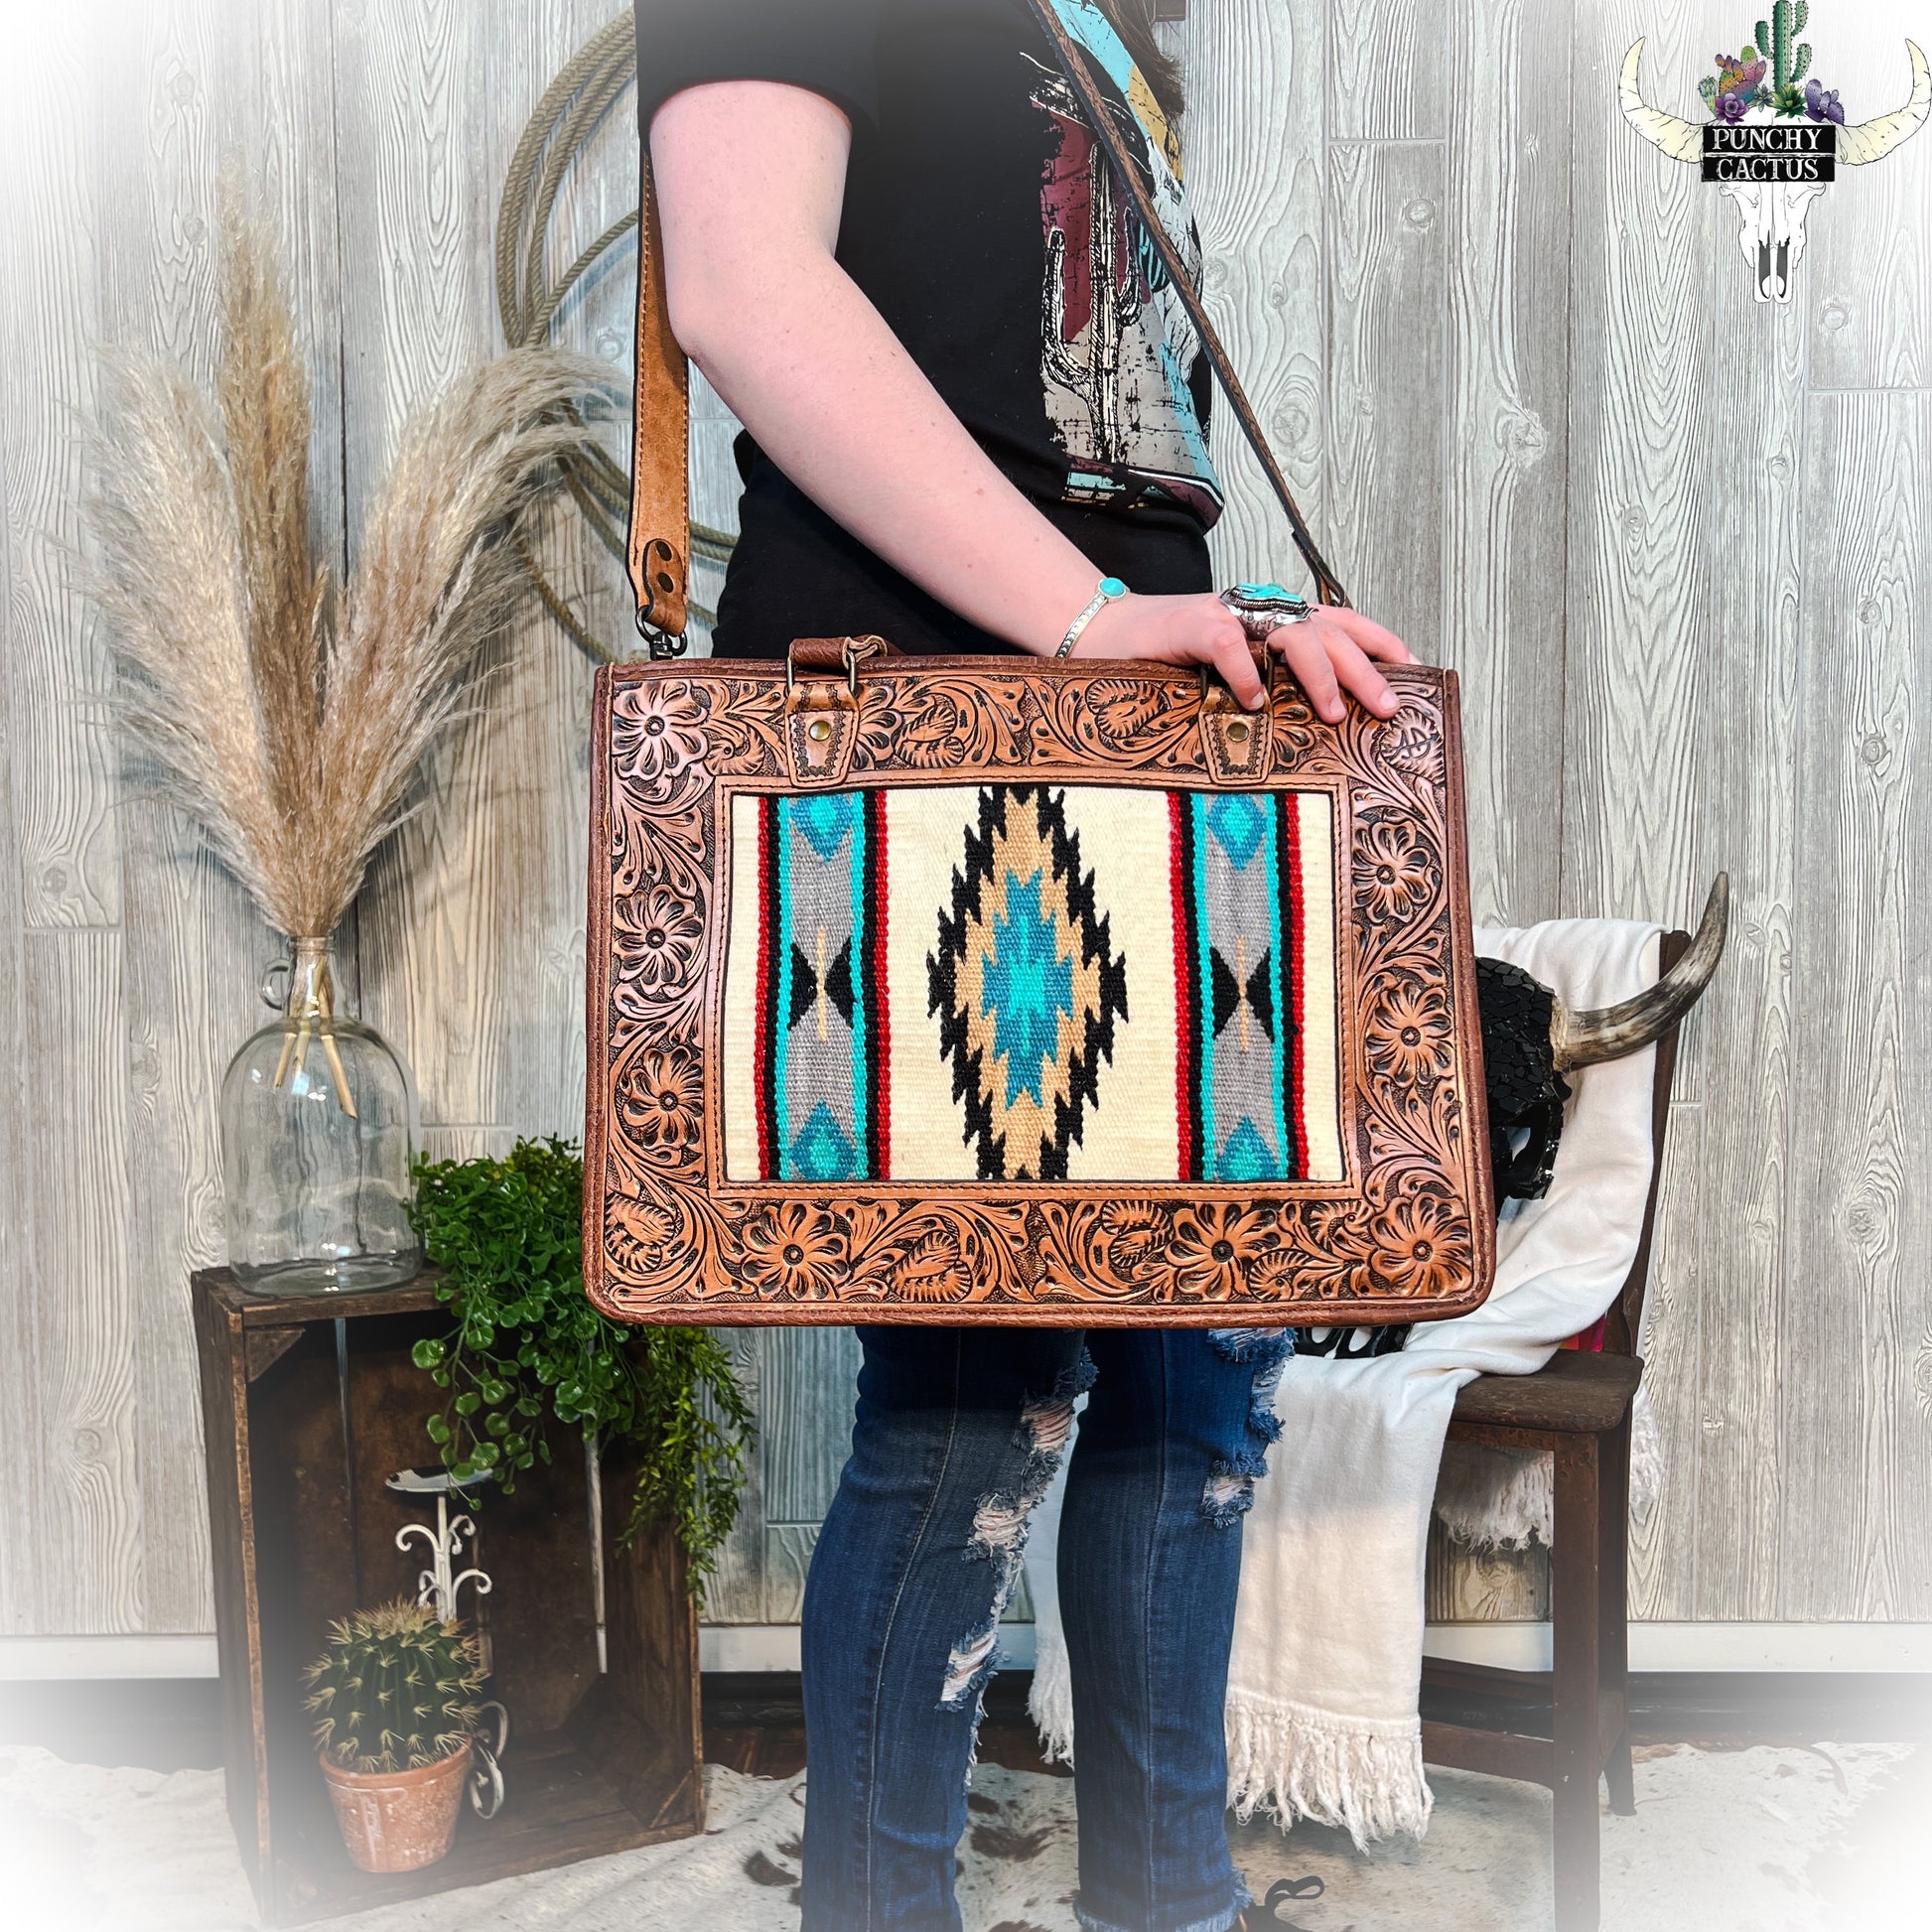 Concealed Carry Western Purse | Punchy Cactus | Western Boutique